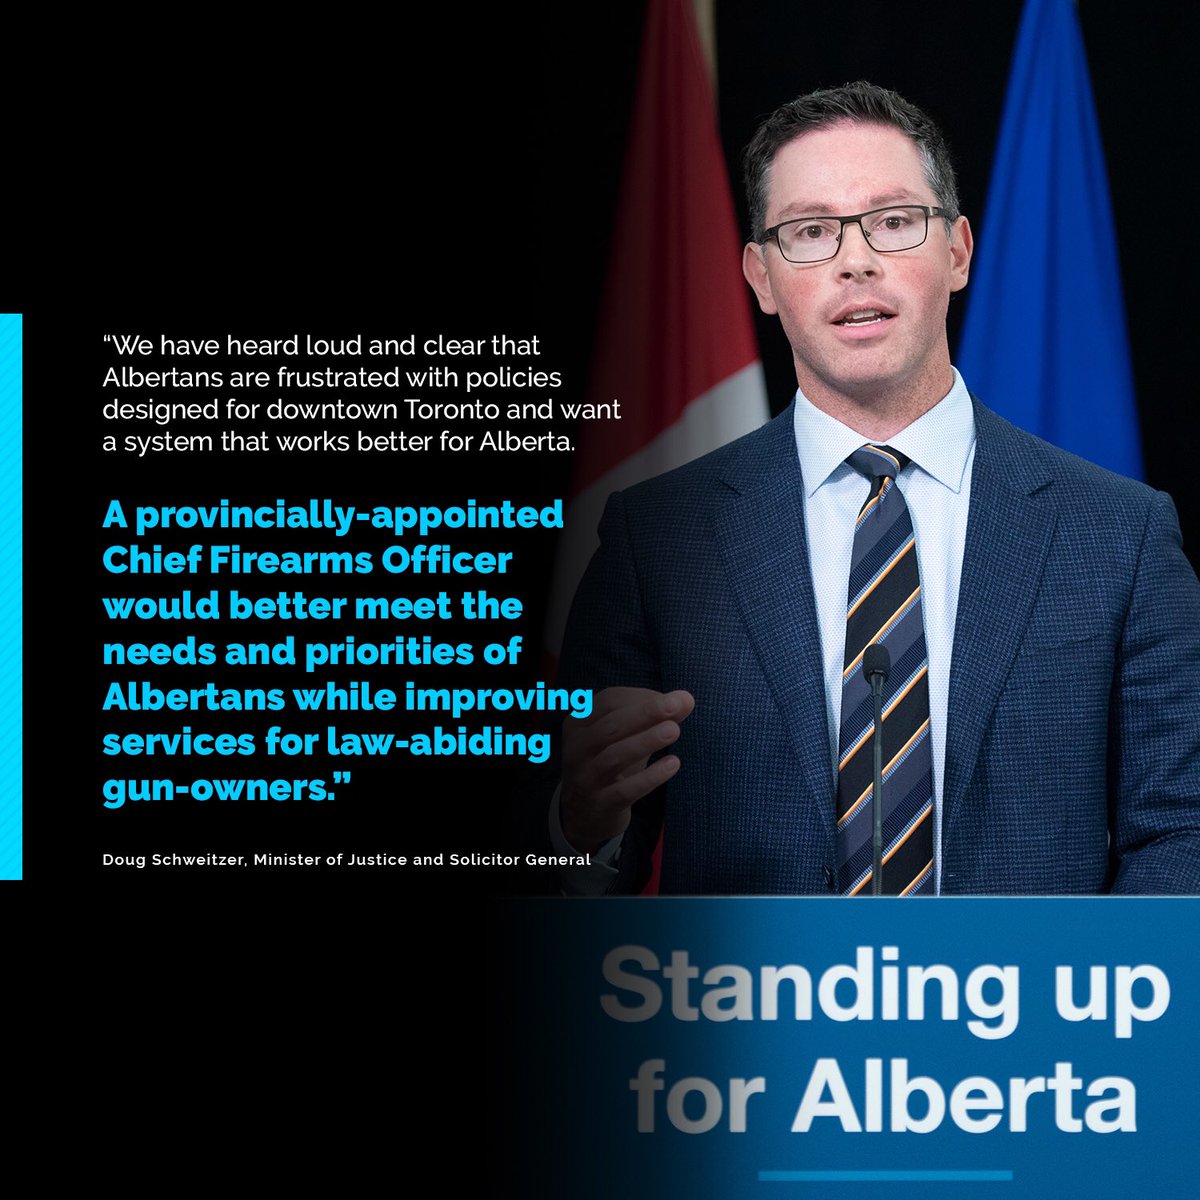 Also worth noting - we marked the release of the Fair Deal Report by sharing that we will follow through on another recommendation.We will be moving quickly to recruit and appoint an Alberta Chief Firearms Officer to replace Ottawa’s appointee. https://www.alberta.ca/announcements.cfm?xID=72625A4C39C25-EEC4-F7E5-B043834863733F1E